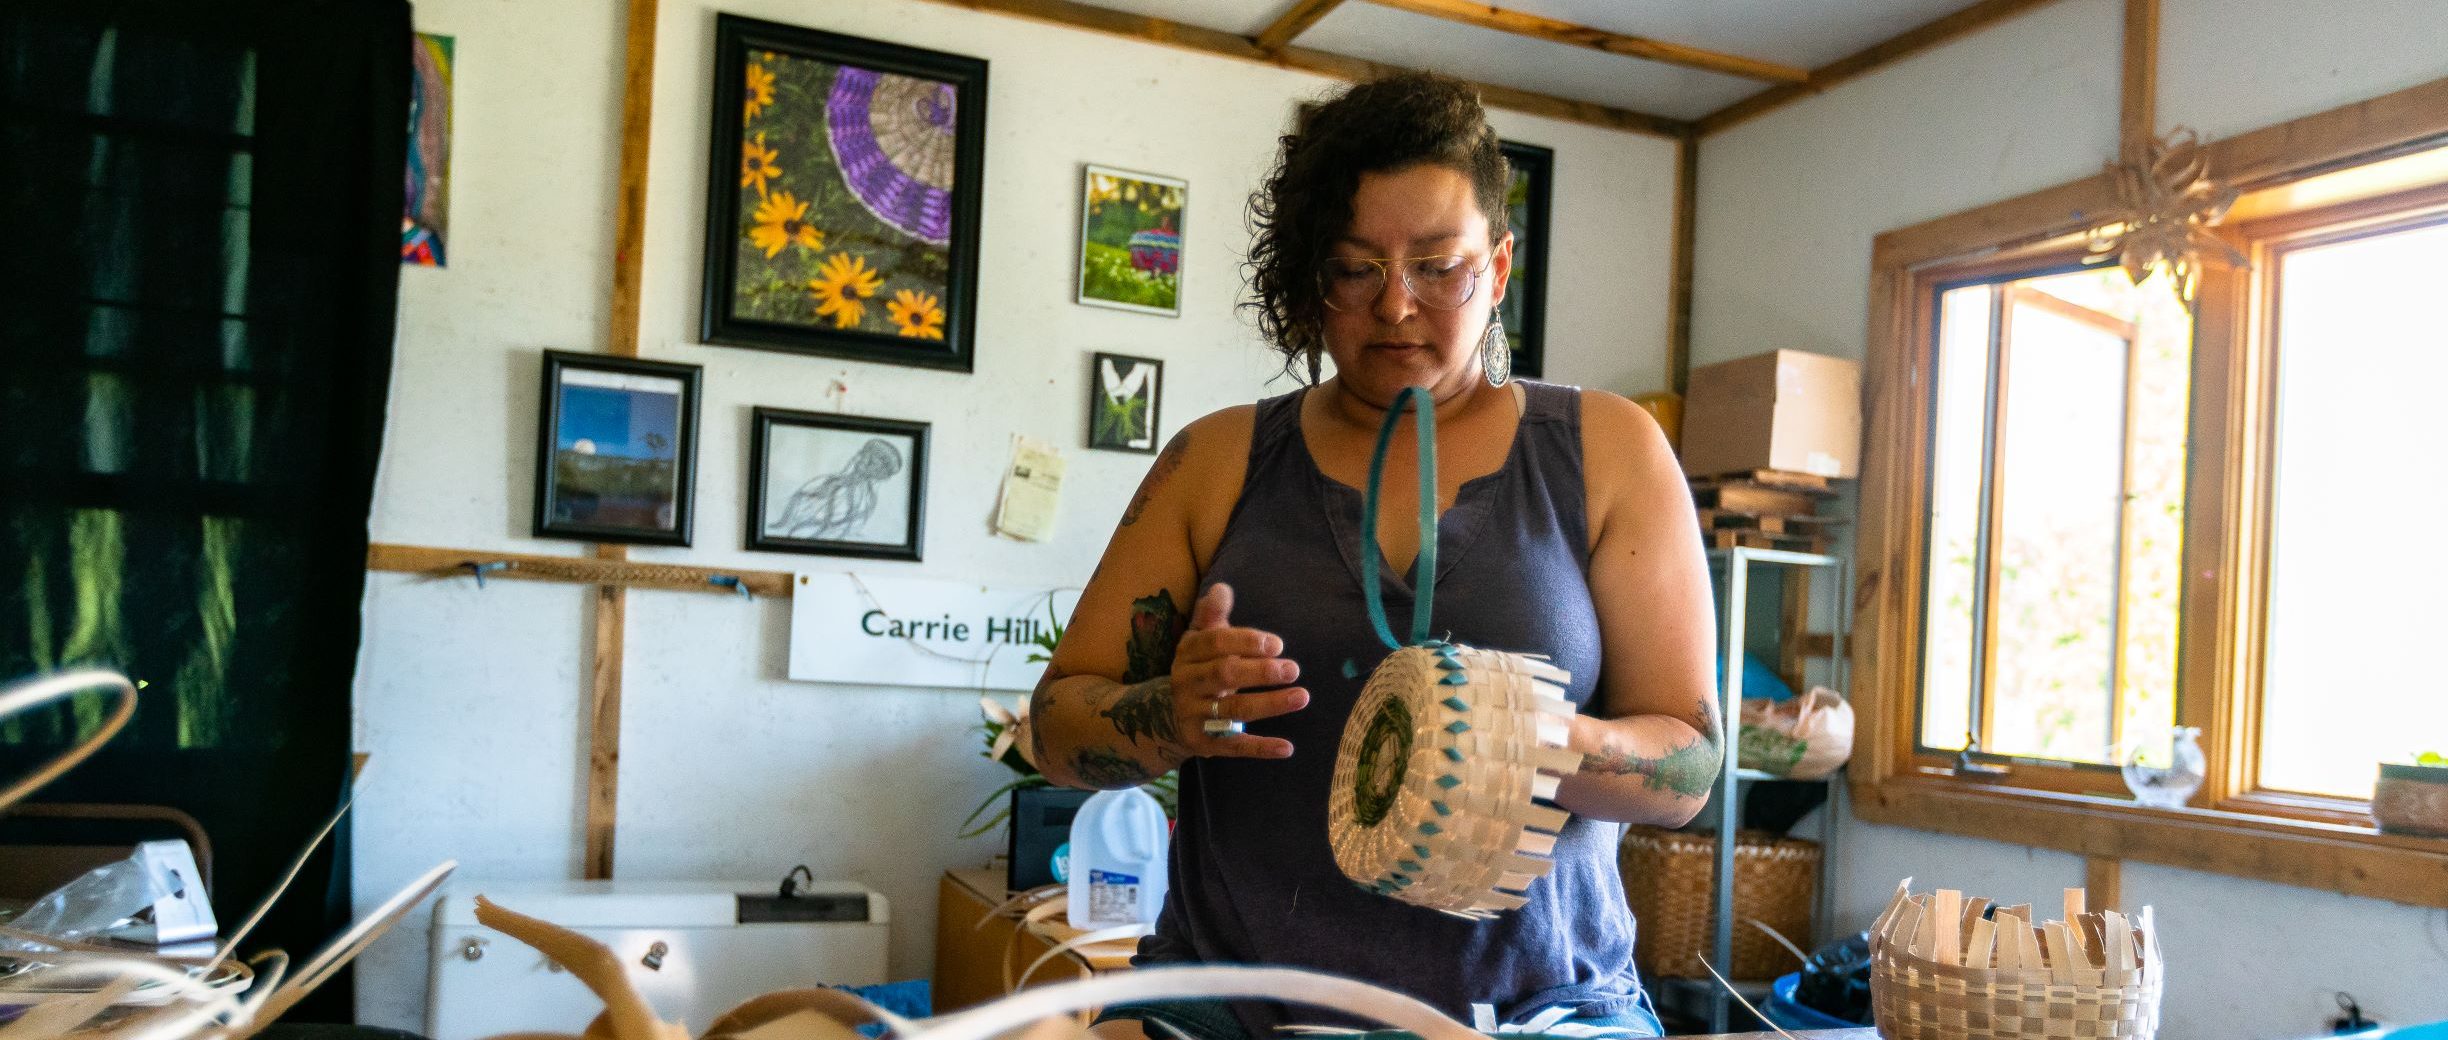 An Akwesasne native, Carrie Hill weaves black ash and sweetgrass Mohawk baskets. This basketmaking tradition goes back generations in her family using materials found in Akwesasne.